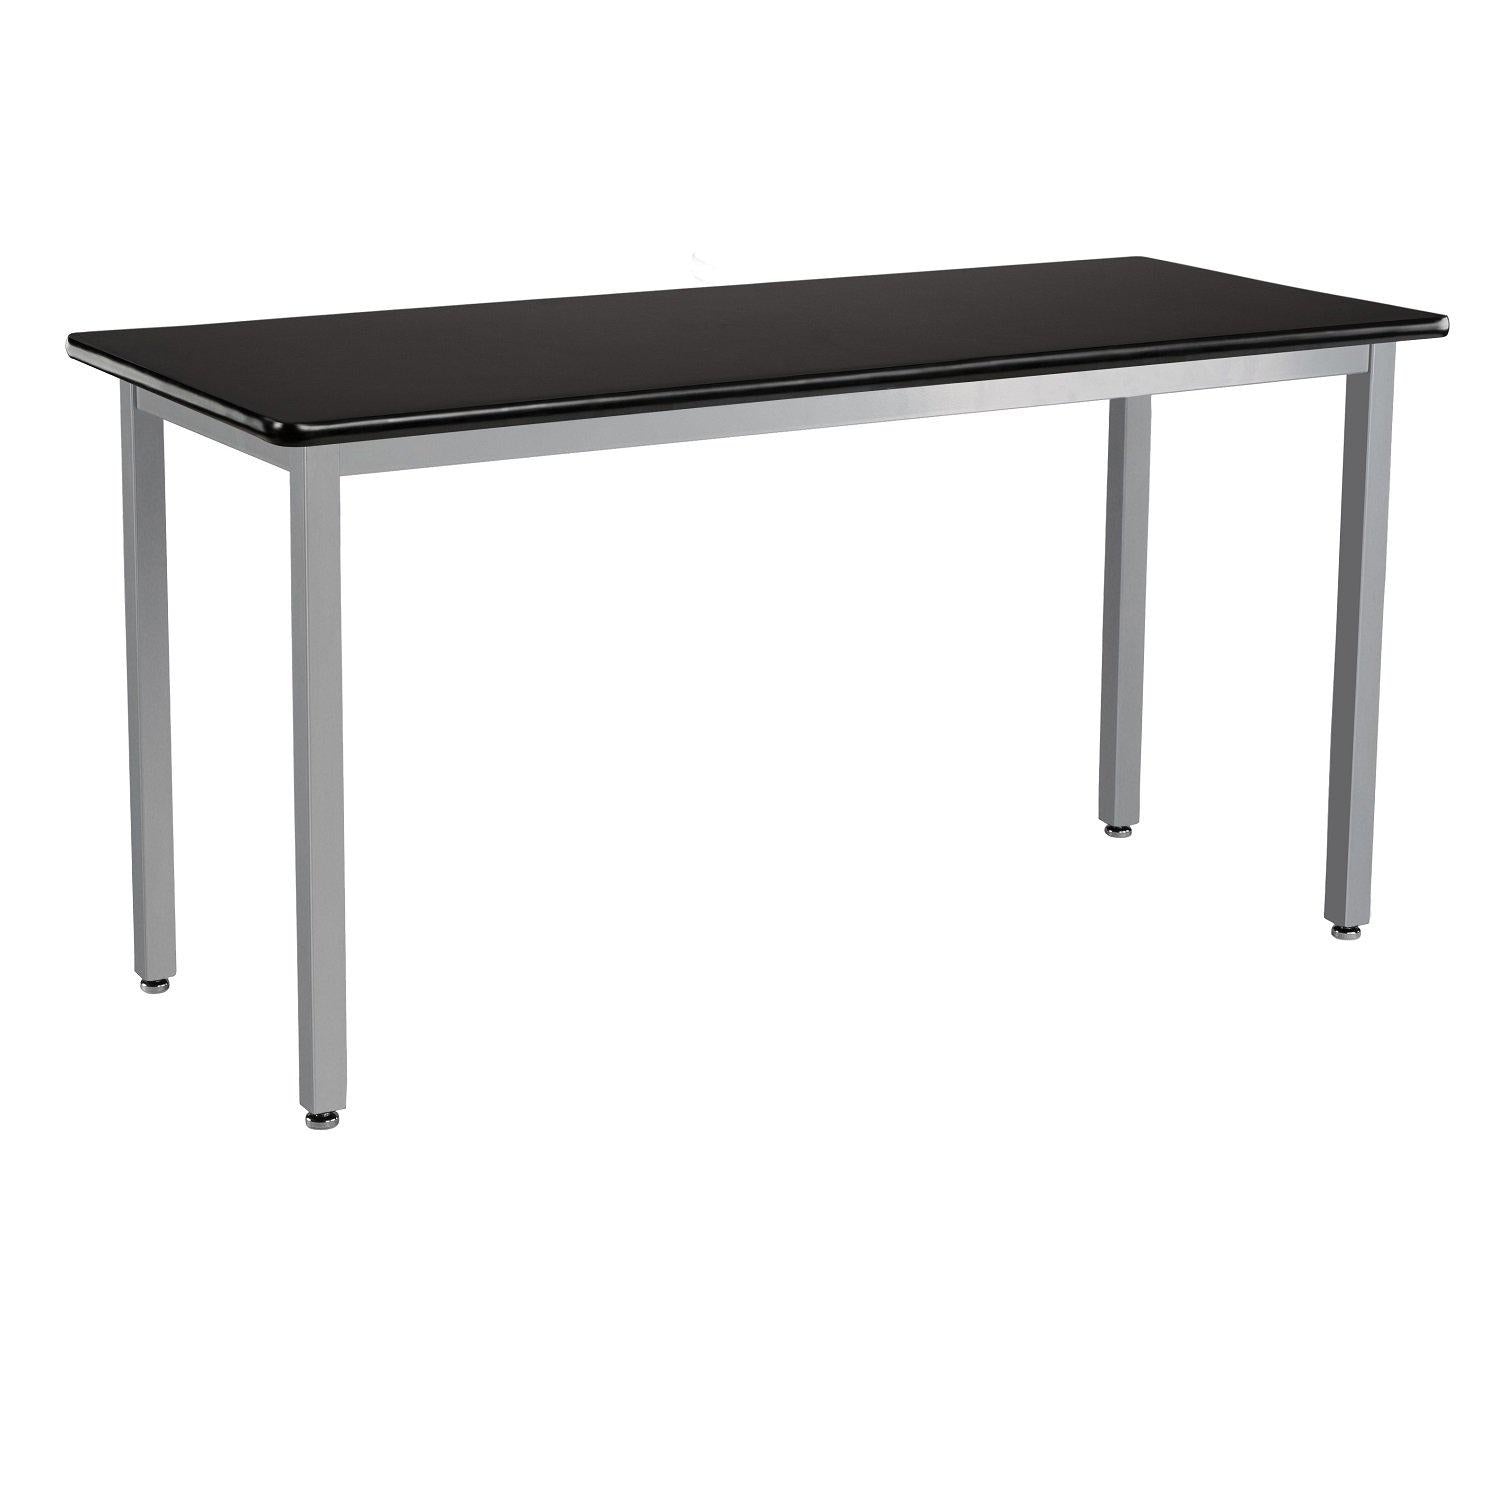 Heavy-Duty Fixed Height Utility Table, Soft Grey Frame, 24" x 42", High-Pressure Laminate Top with T-Mold Edge